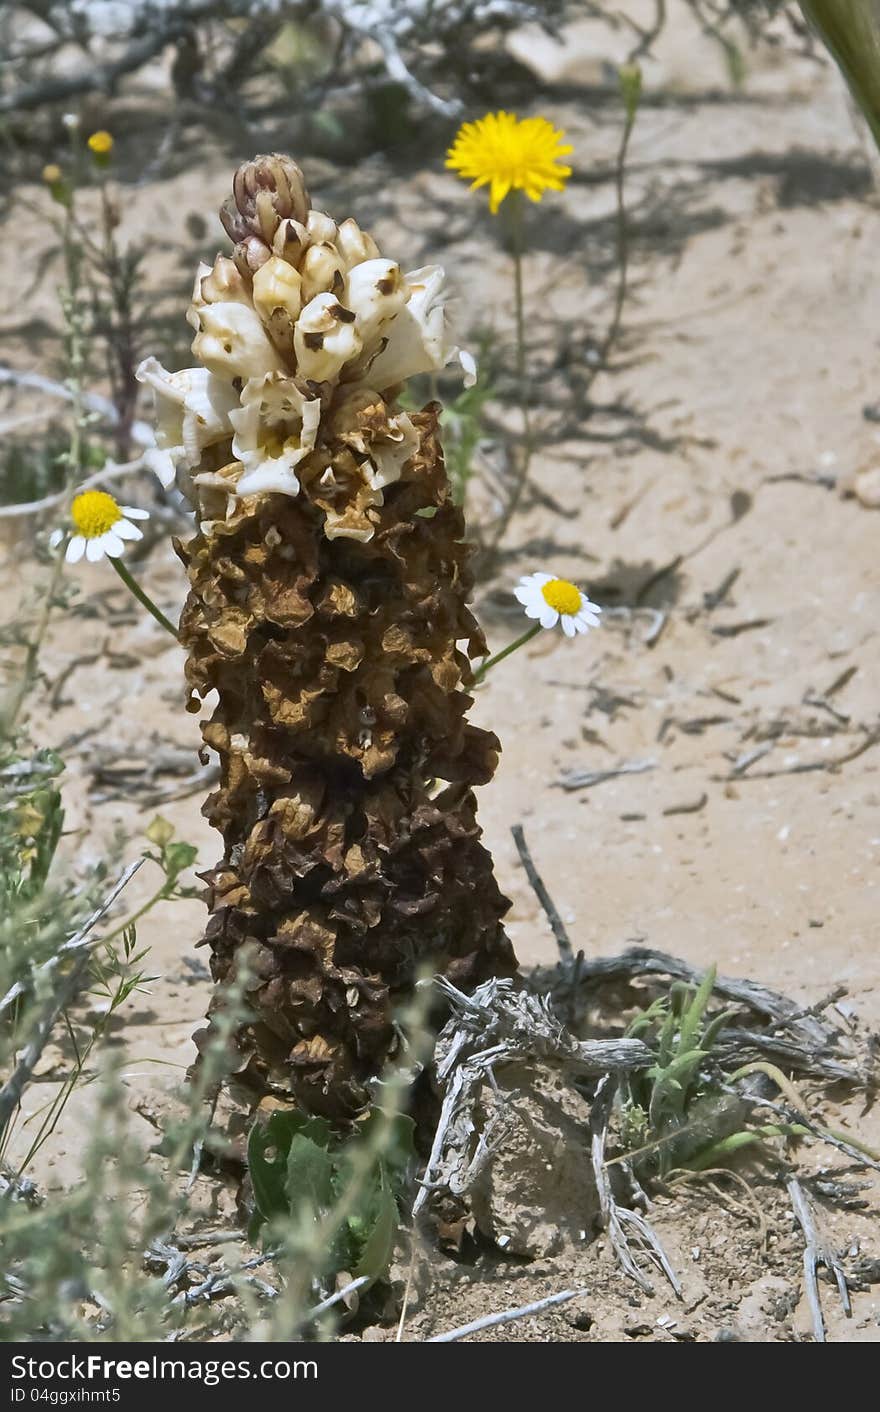 During a spring time there are many beautiful blossoming flowers in desert of the Negev, Israel. During a spring time there are many beautiful blossoming flowers in desert of the Negev, Israel